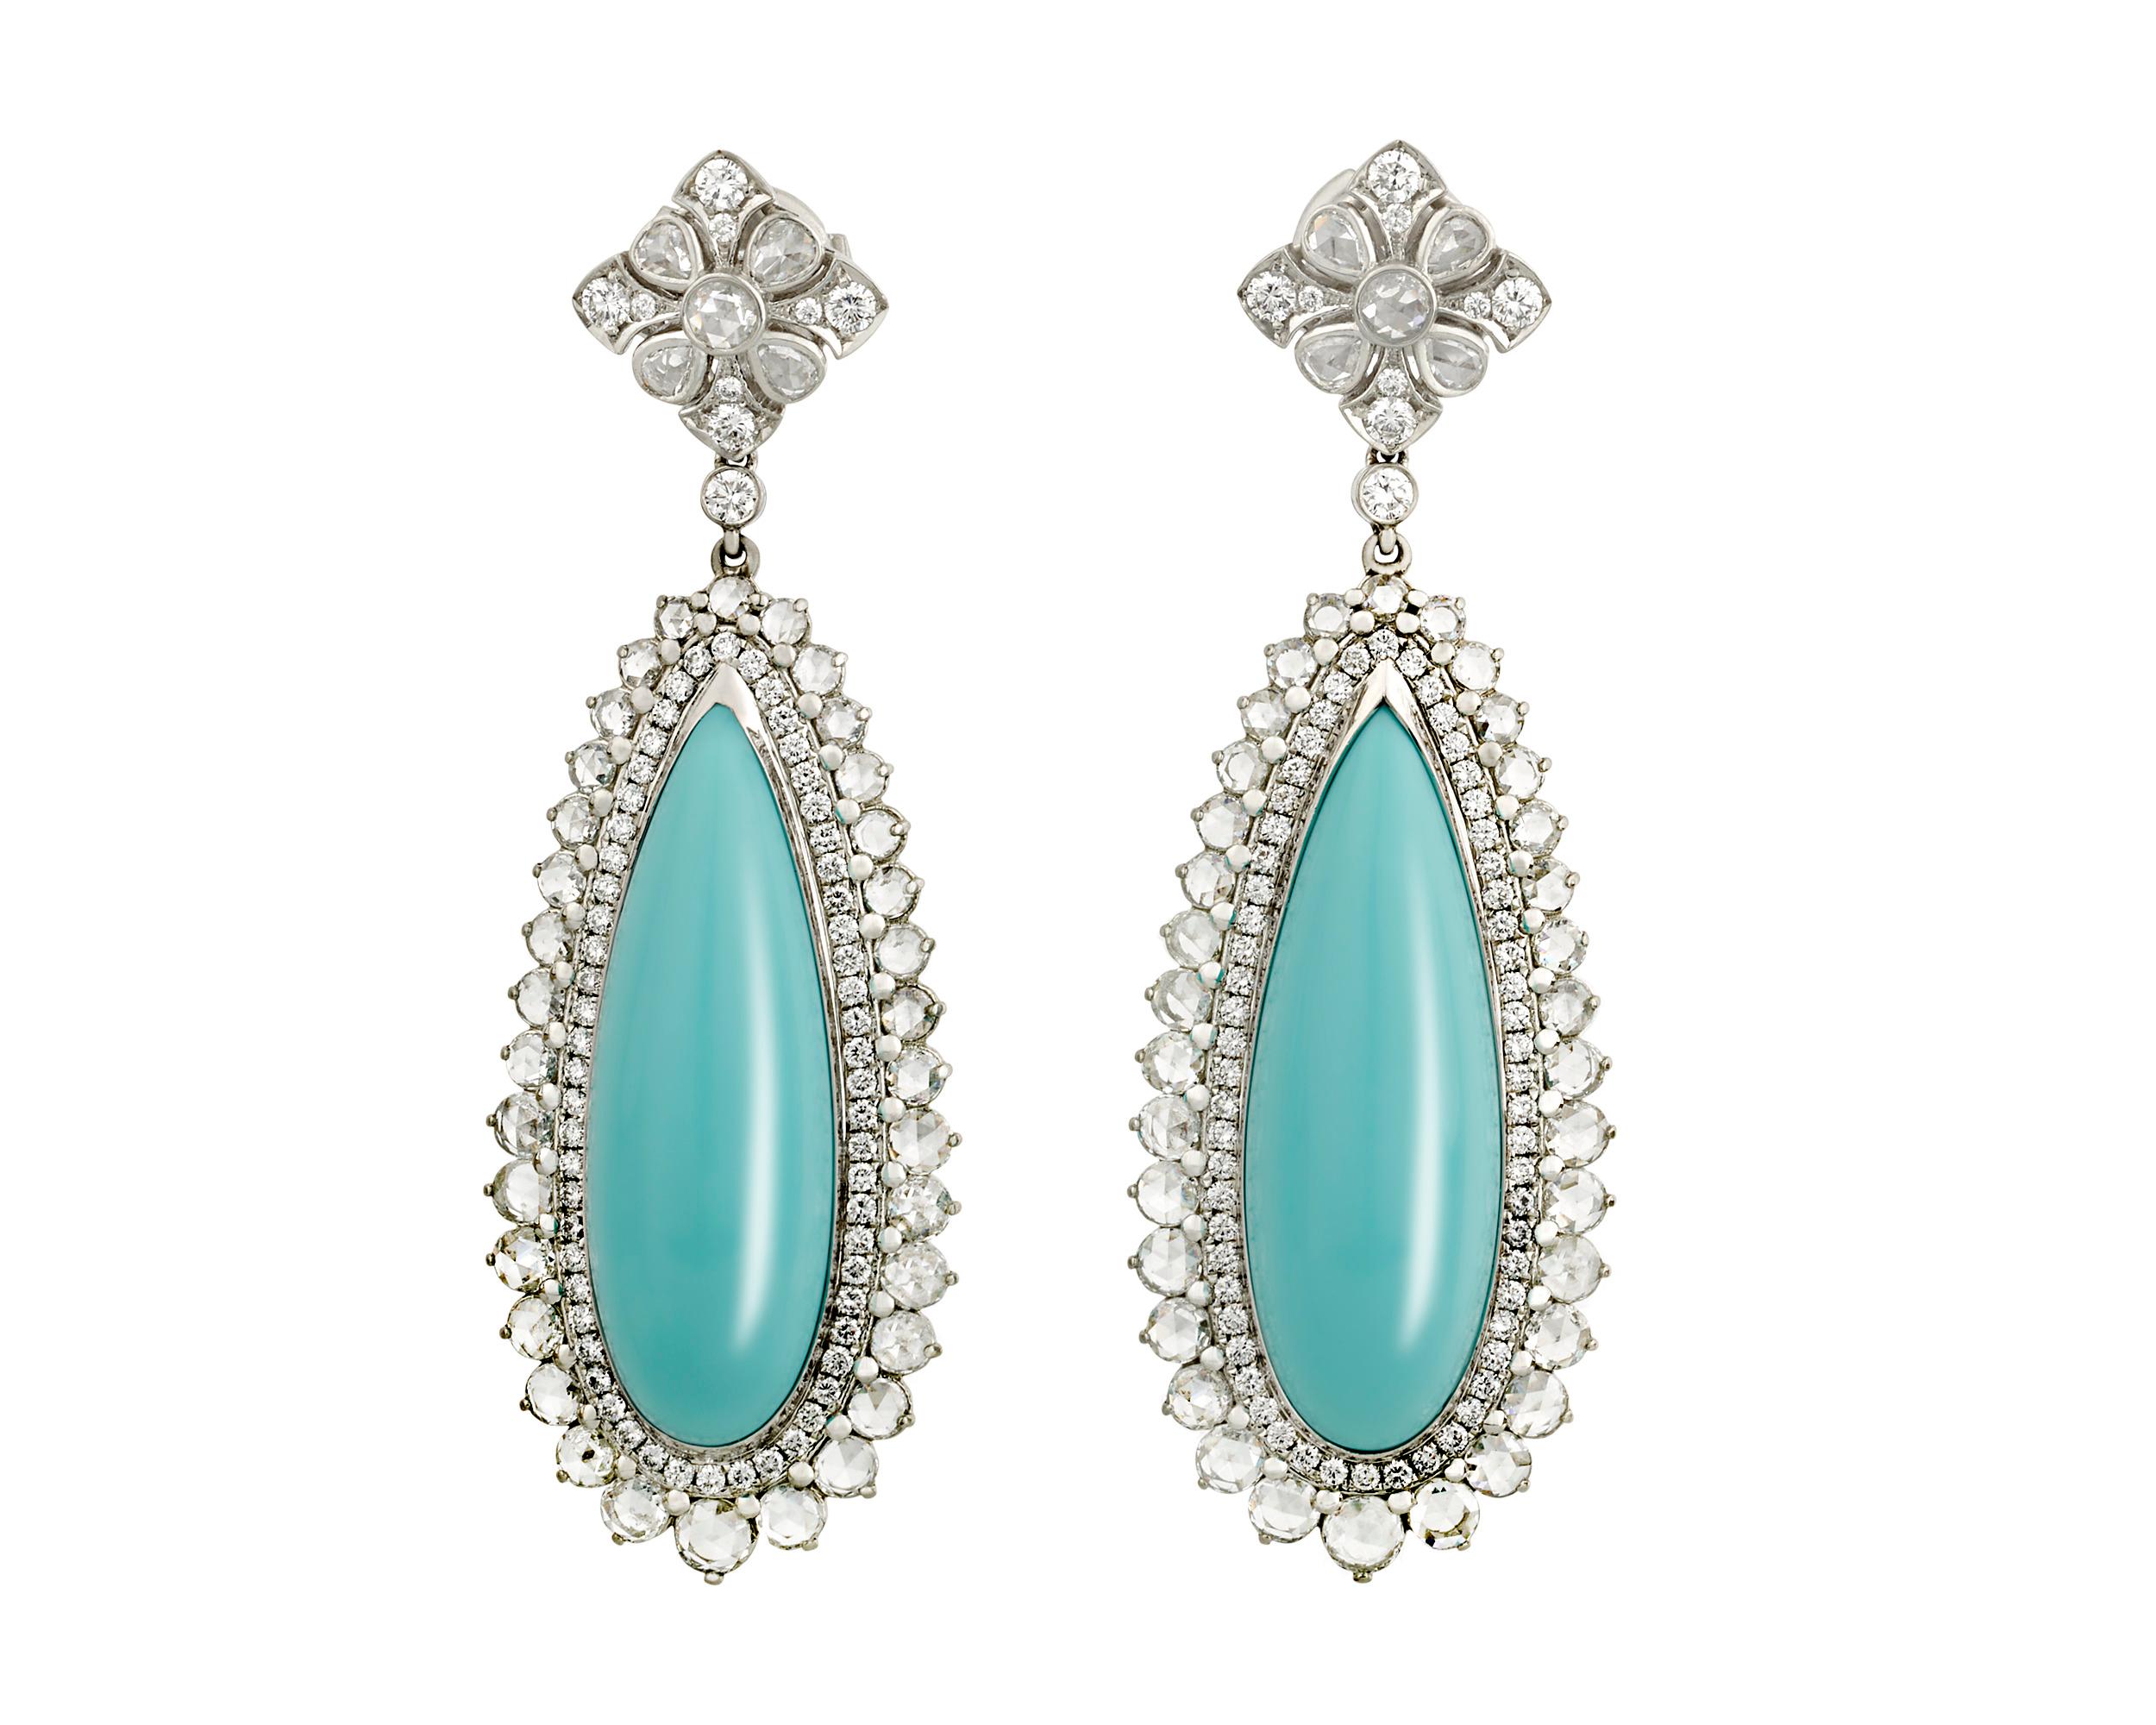 The cool blue of turquoise is accented by the drama of sparkling diamonds in these classic Tiffany & Co. earrings. The turquoise stones, totaling 23.77 carats and displaying Tiffany's signature blue hue, dangle elegantly in their platinum setting